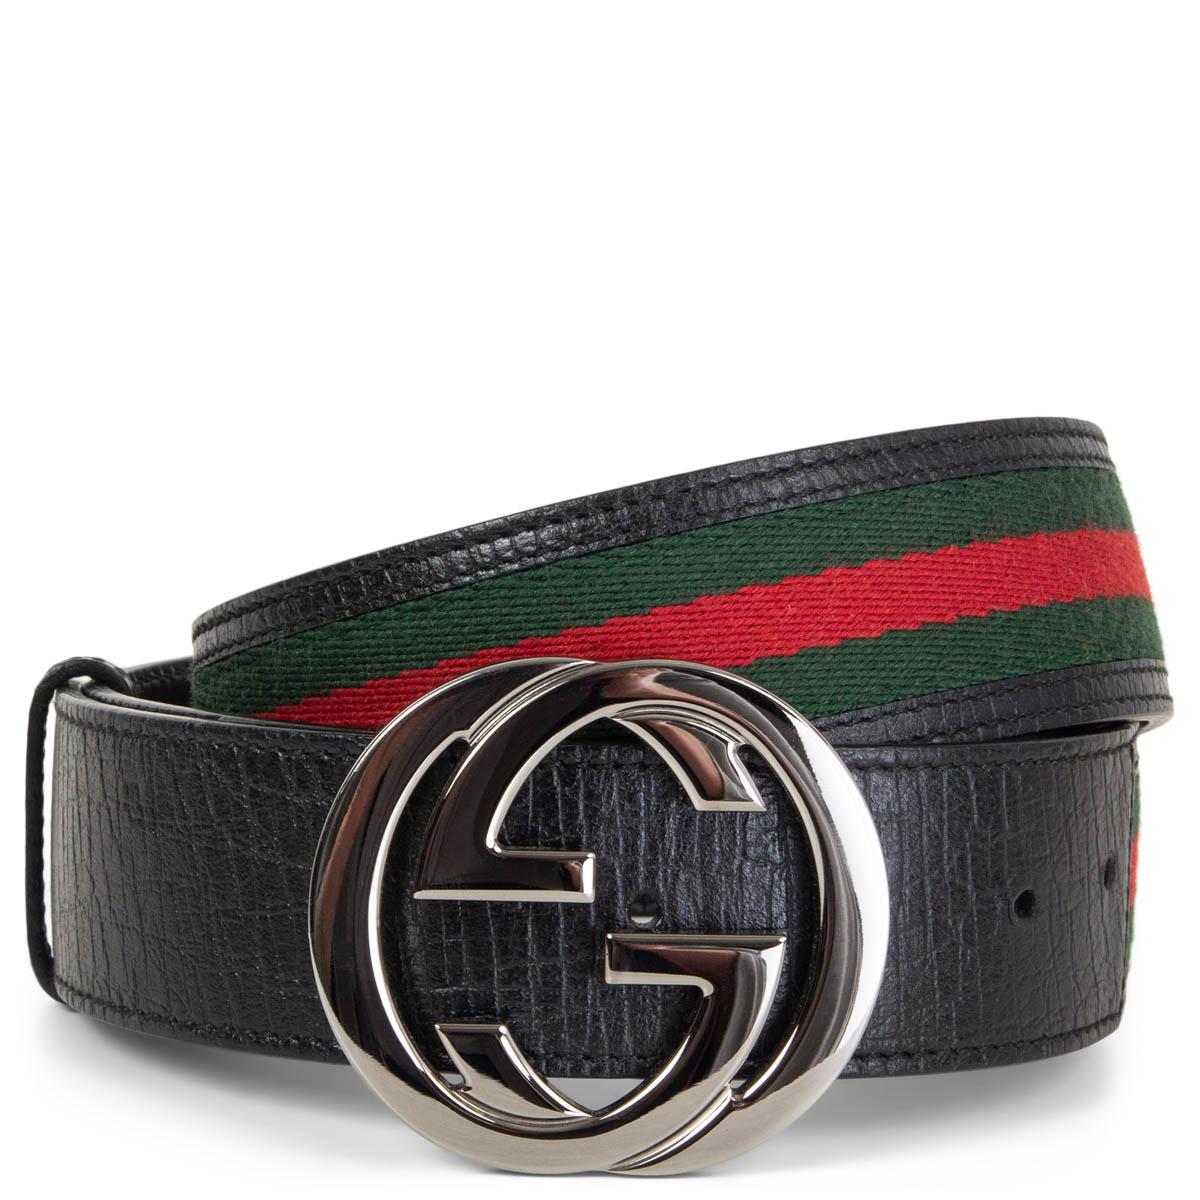 100% authentic Gucci signture web belt in green and red canvas with black leather trim and gunmetal interlocking g buckle. Has been worn and is in excellent condition. Comes with dust bag.

Measurements
Tag Size	80/32
Width	4cm (1.6in)
Fits	76cm